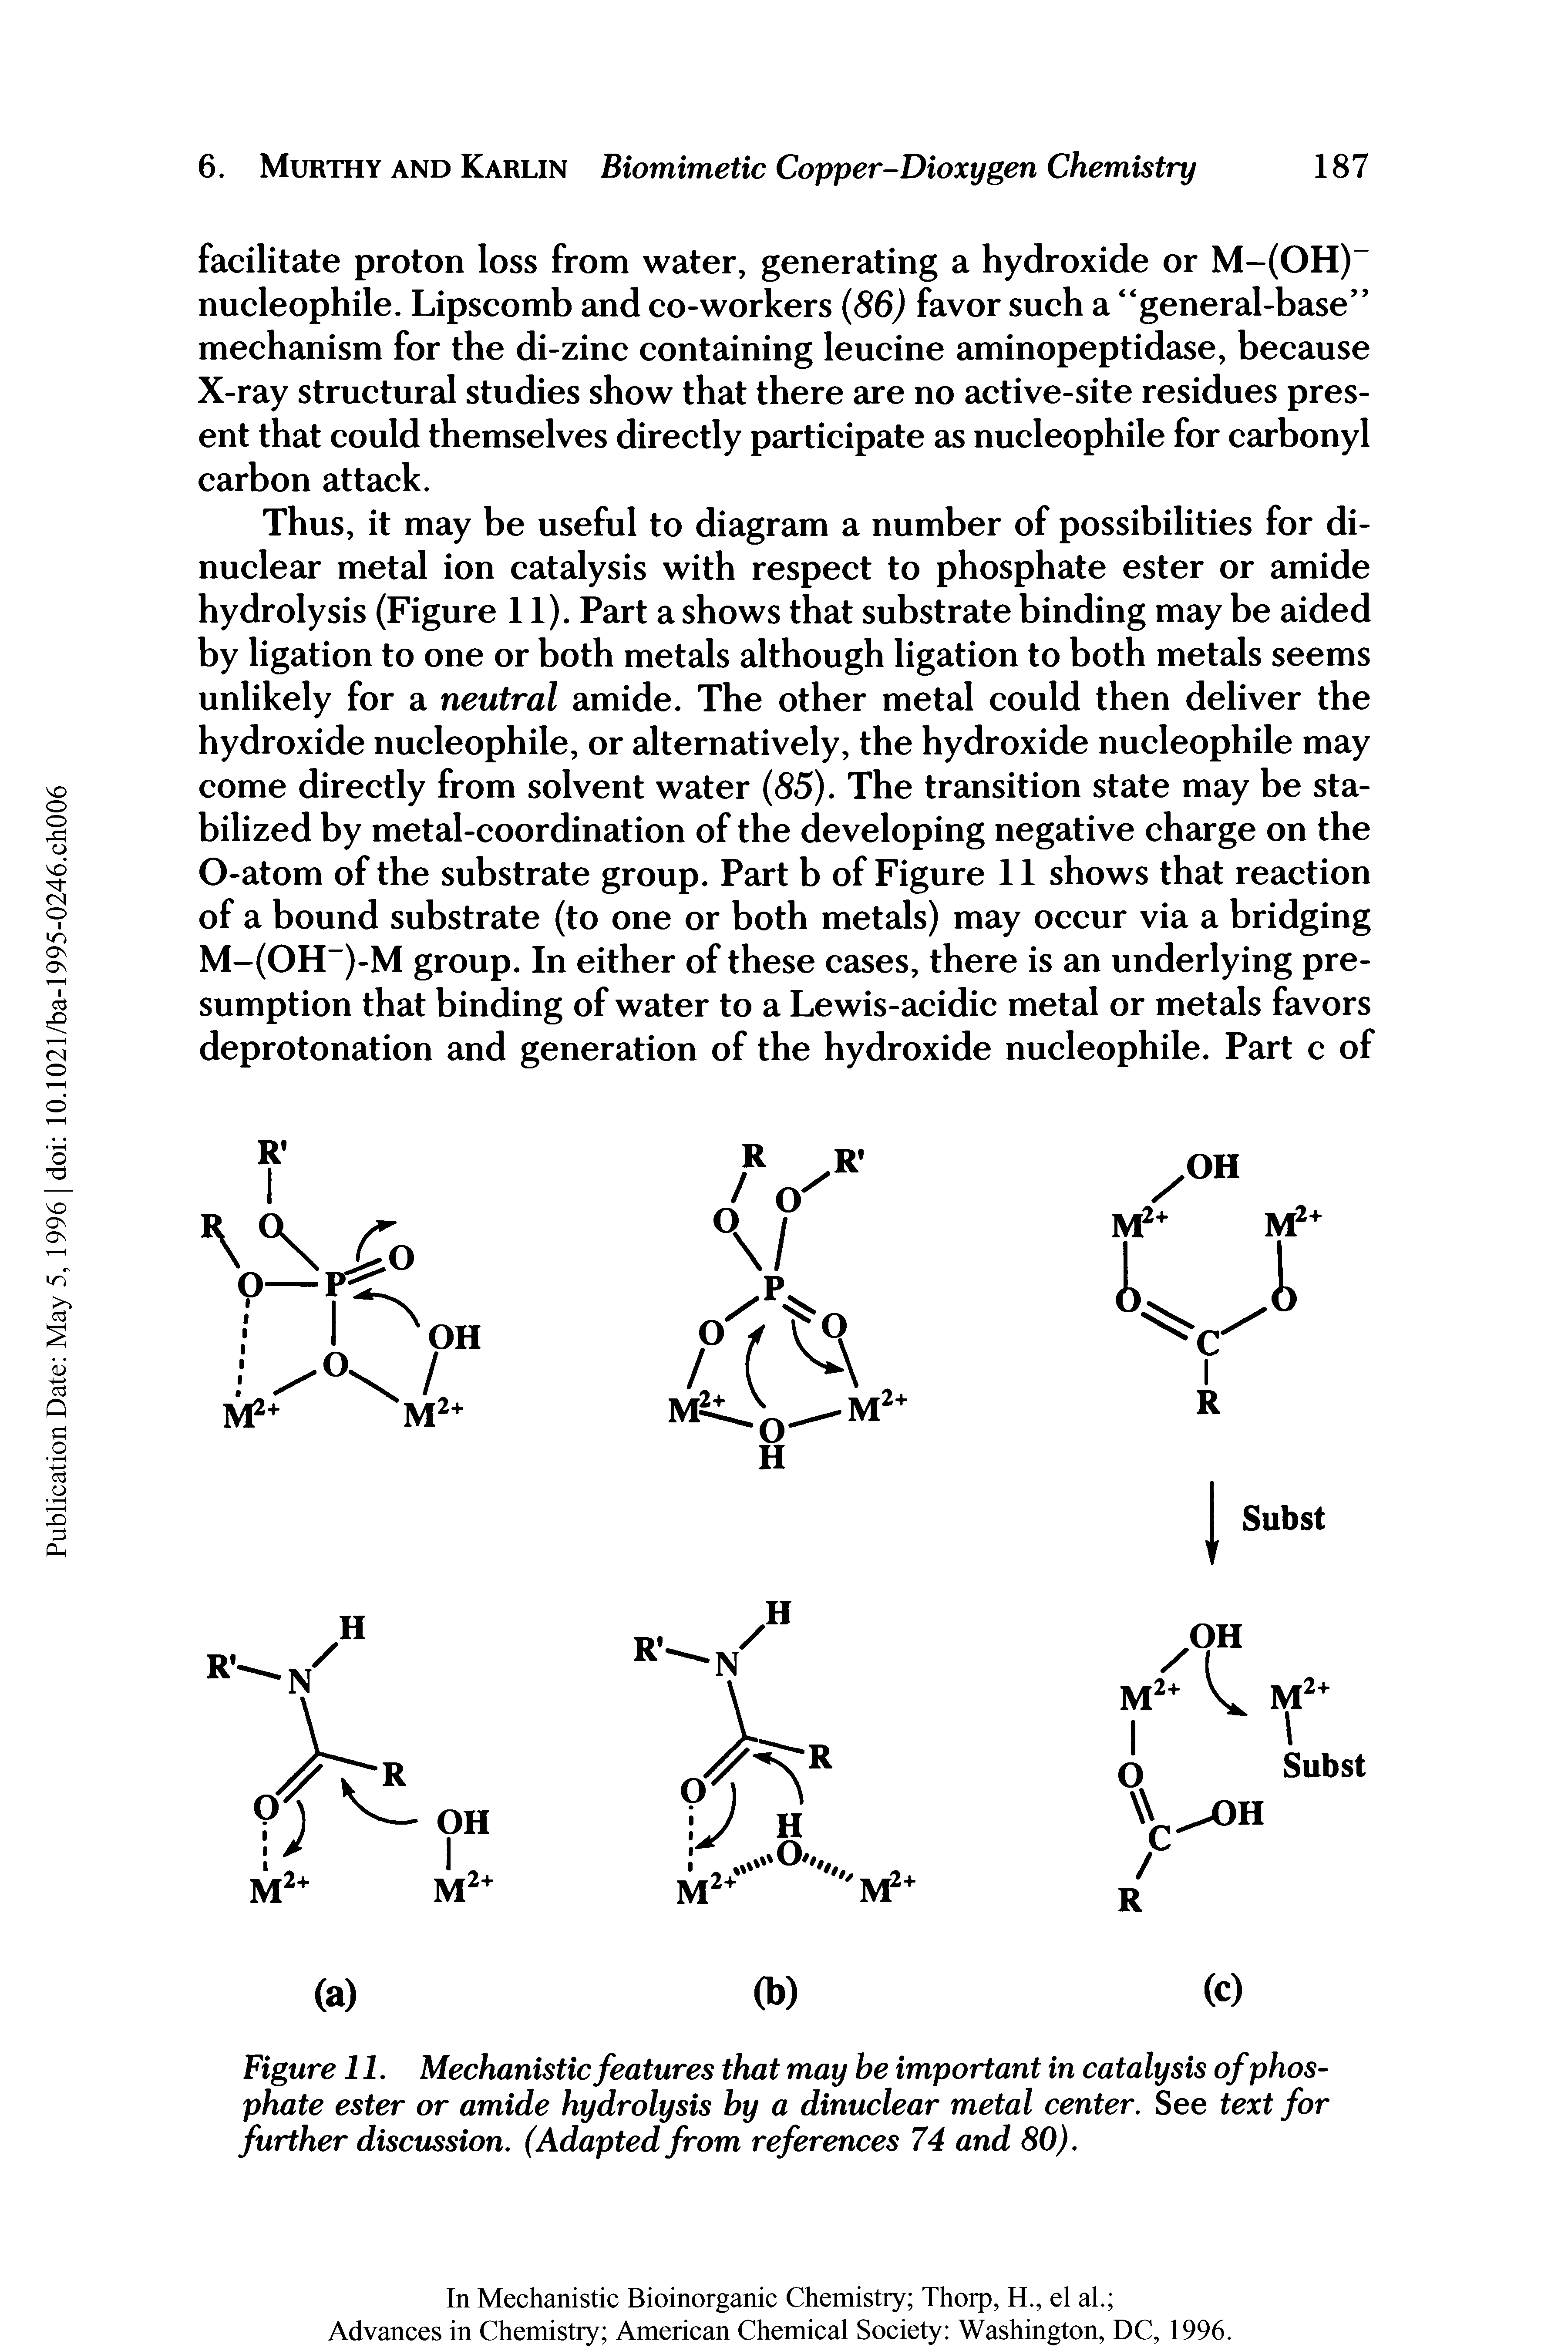 Figure 11. Mechanistic features that may be important in catalysis of phosphate ester or amide hydrolysis by a dinuclear metal center. See text for further discussion. (Adapted from references 74 and 80).